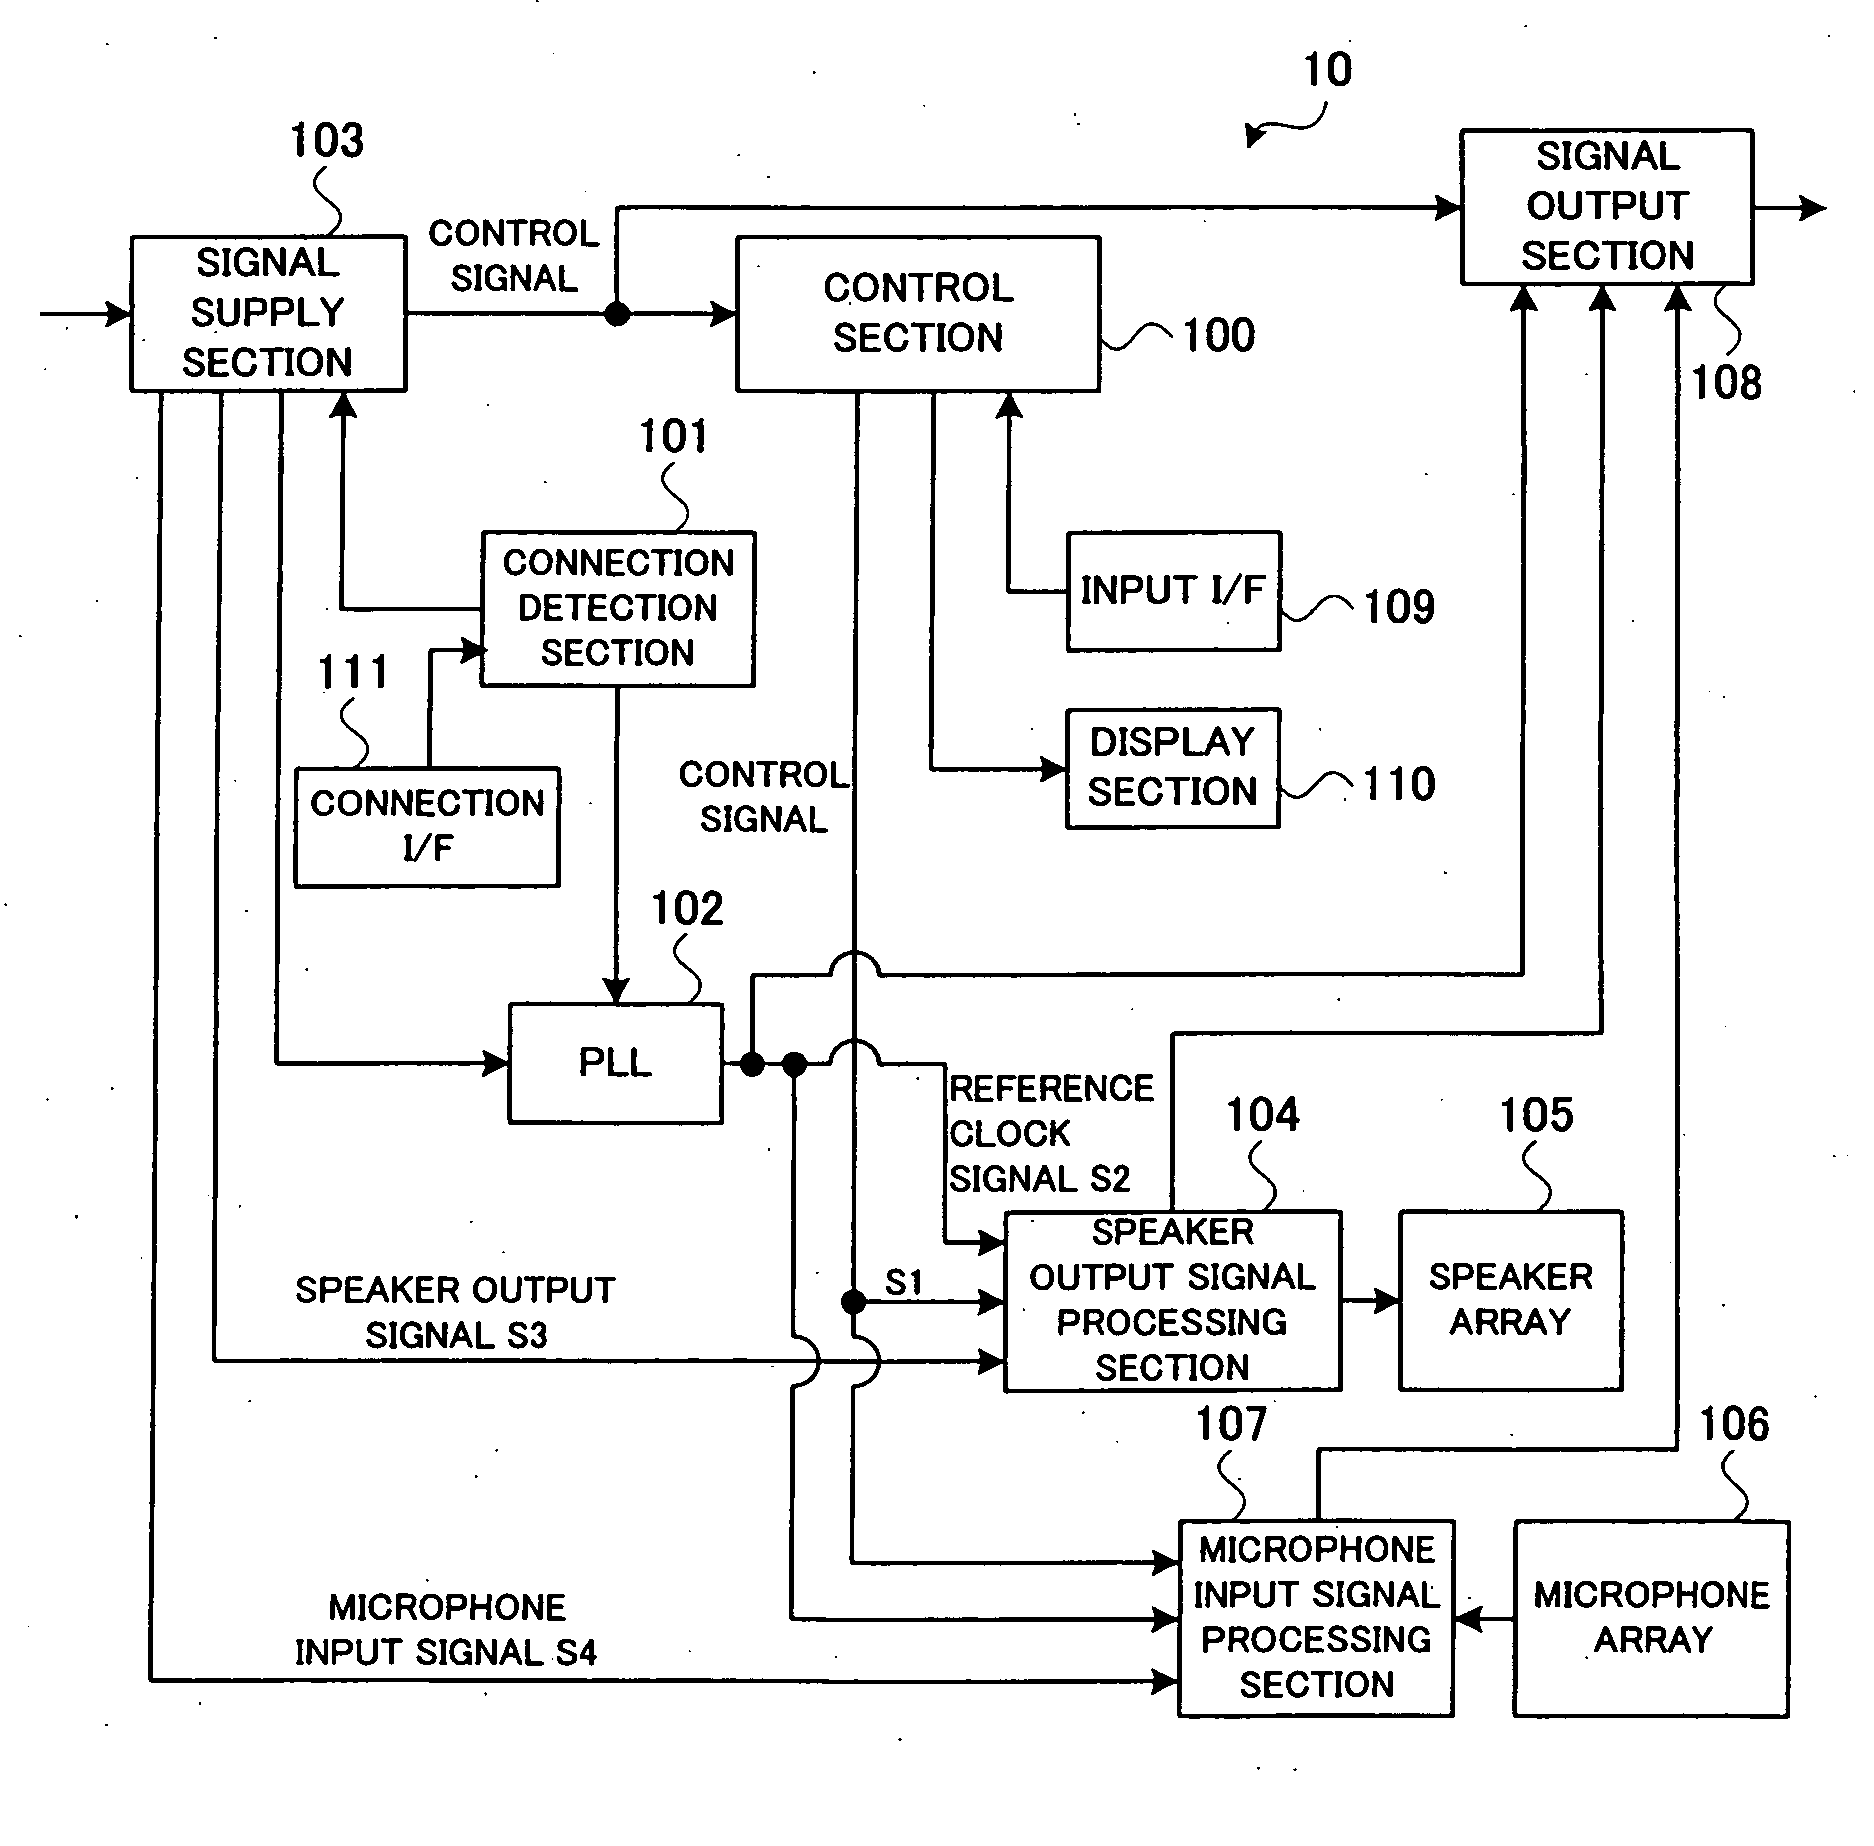 Sound system, method for controlling the sound system, and sound equipment